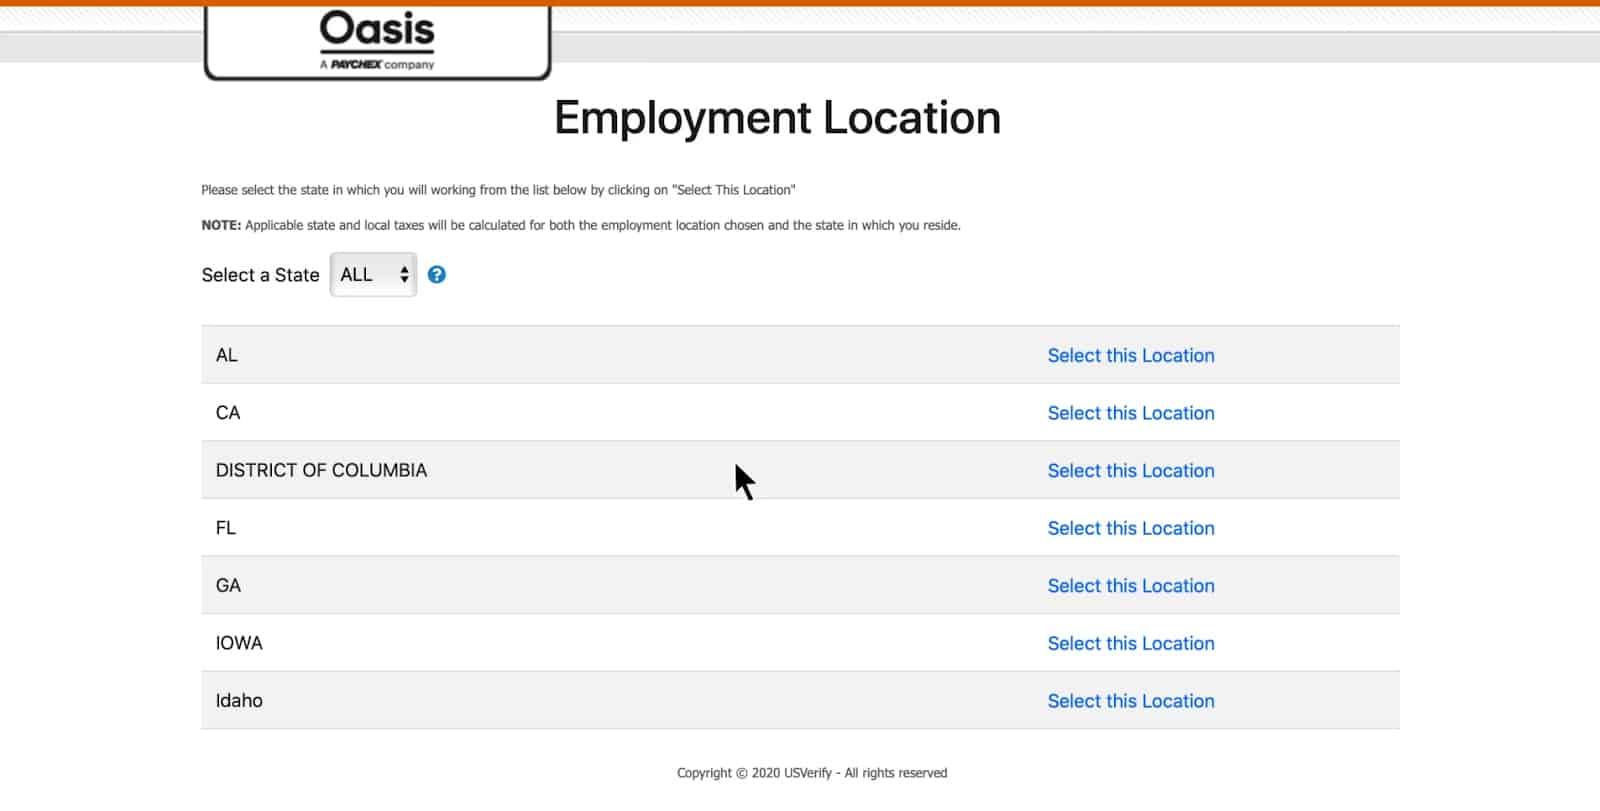 Oasis’s Employment Location page that new hires can select their location by choosing state and click 'Select this Location' button.